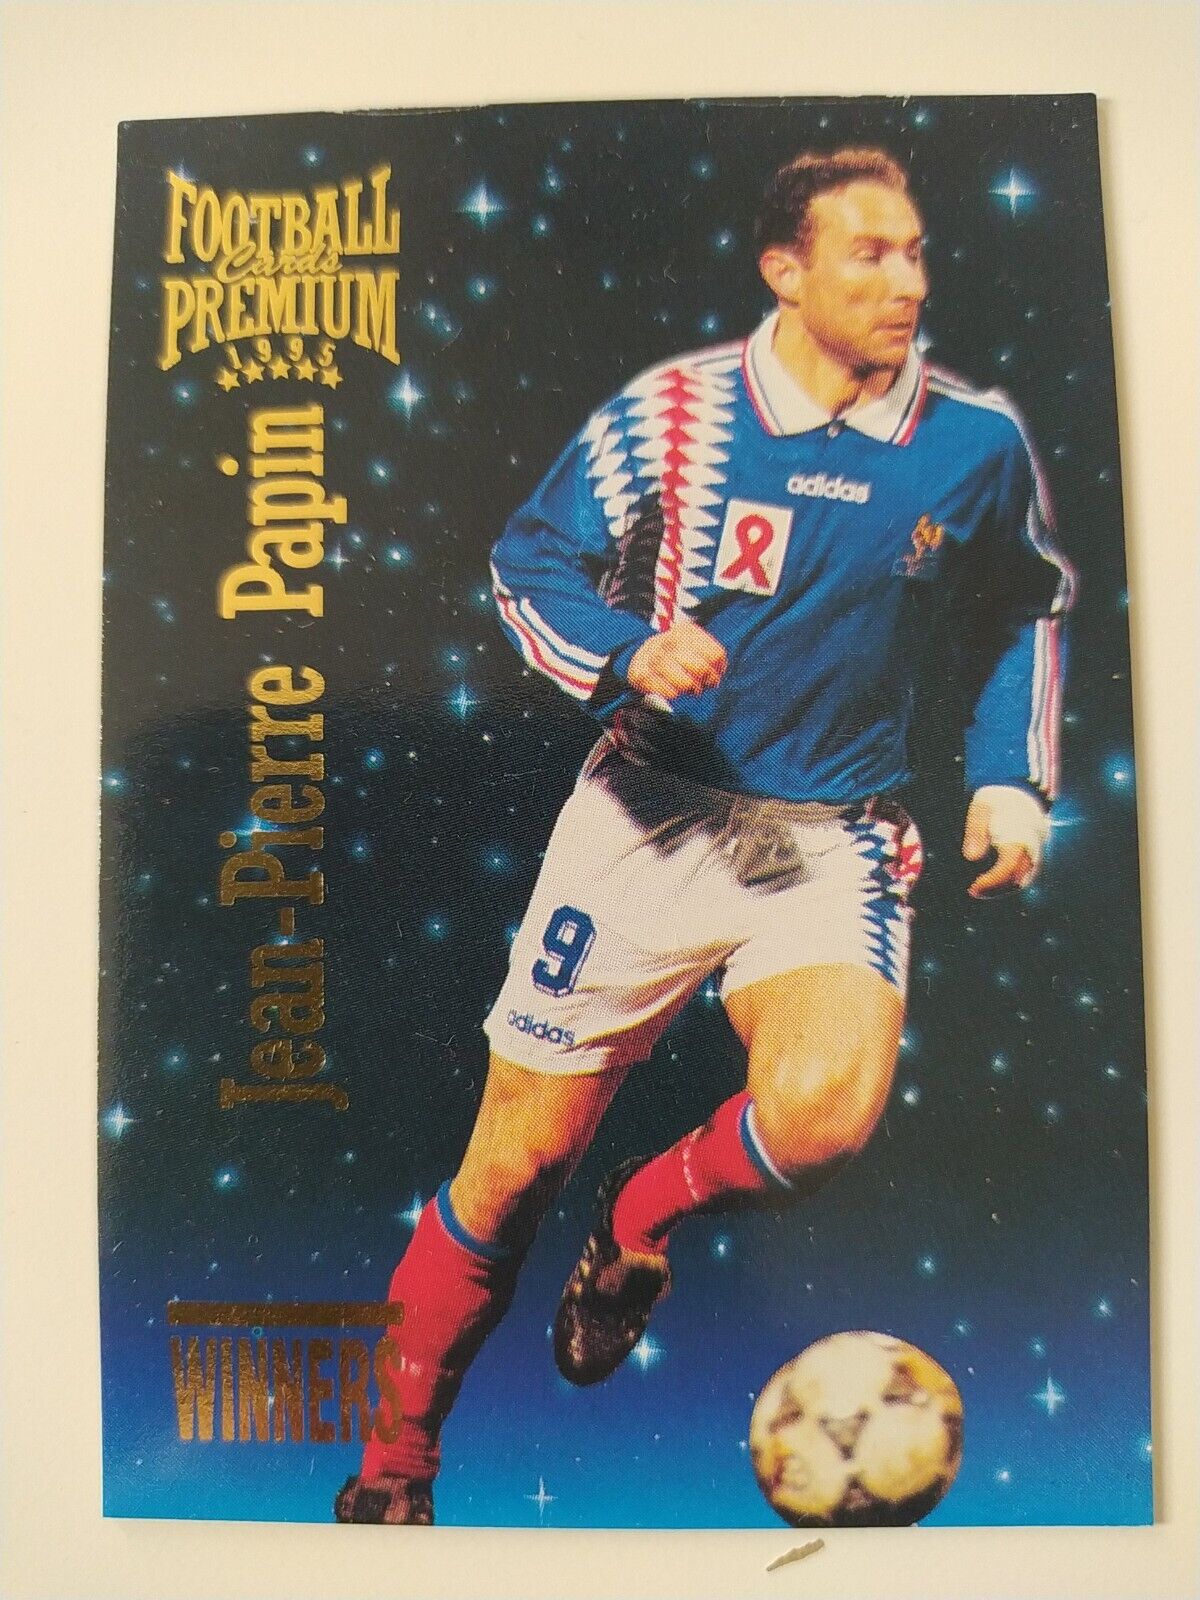 Jean Pierre PAPIN - PANINI FOOTBALL CARDS PREMIUM 1994 - WINNERS #W27 - Collection